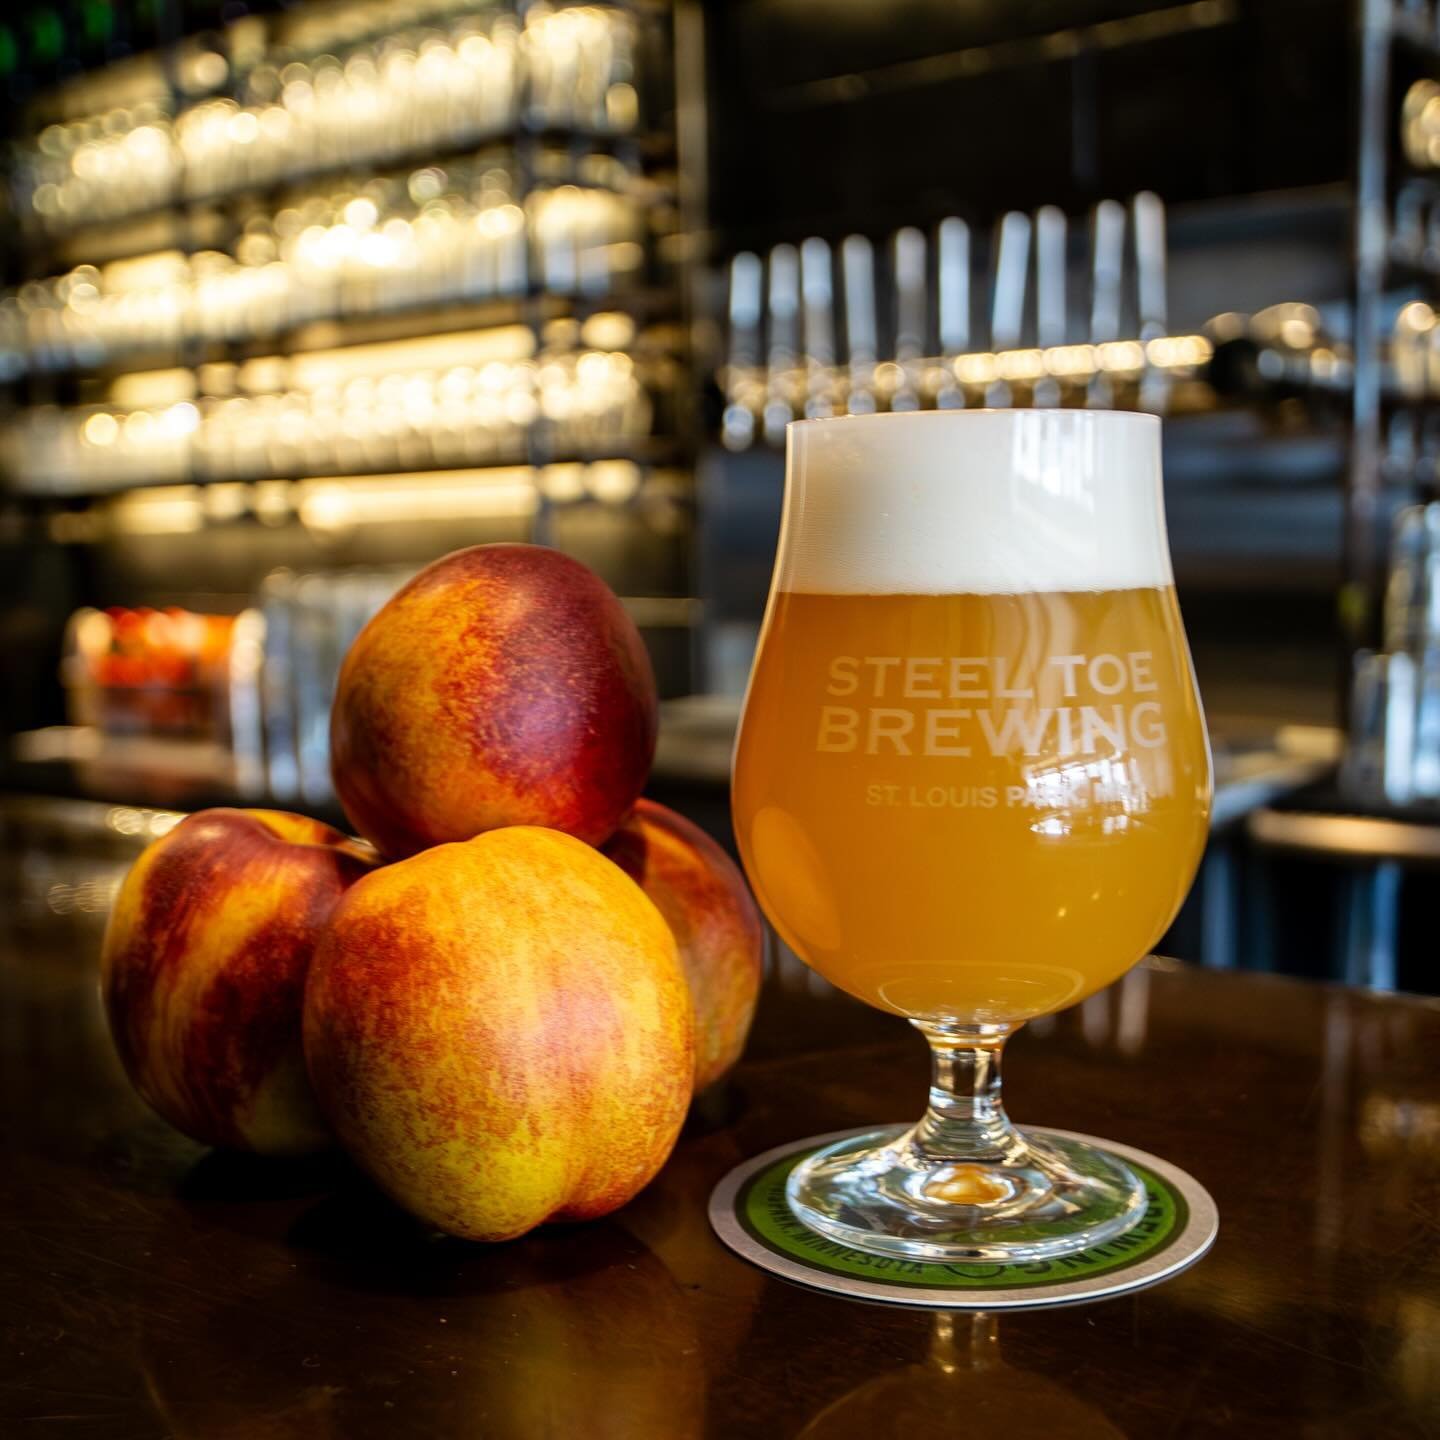 🍑🍻 Oh MY!! Fuzzy Boots Peach Sour!! Our 4th beer in our &ldquo;Crew Brew Series&rdquo; is on tap NOW!! 🍑🥾

Our 4th Crew Brew Series was brewed with our bartender, Abby! Fuzzy Boots Peach Sour has ripe peach aromas with soft peach candy notes on t